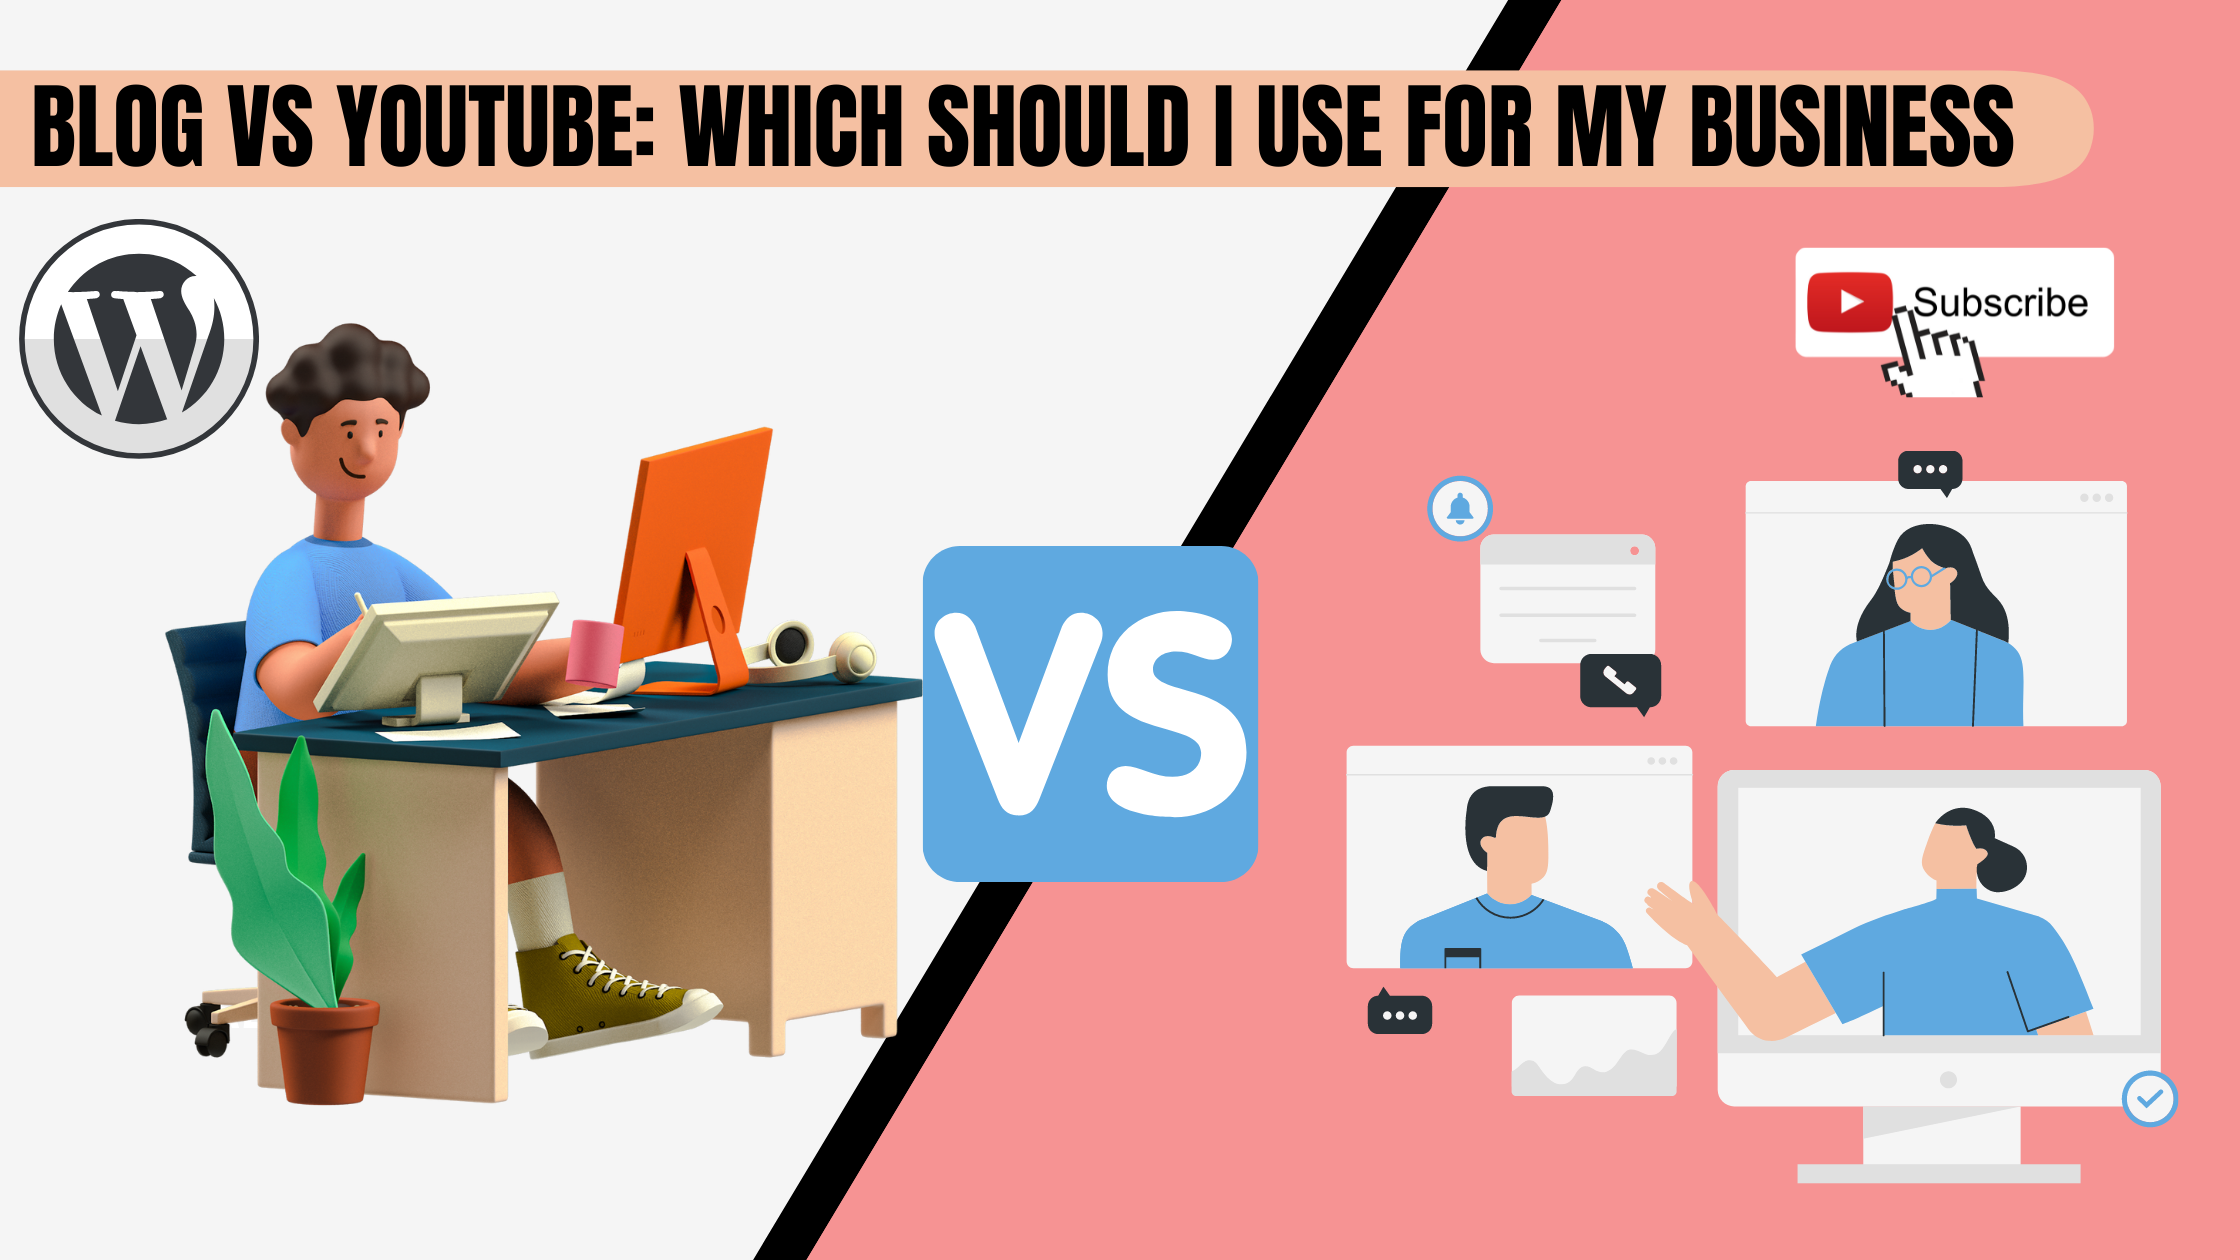 Blogging Vs Youtube: Which Should I Use For My Business?